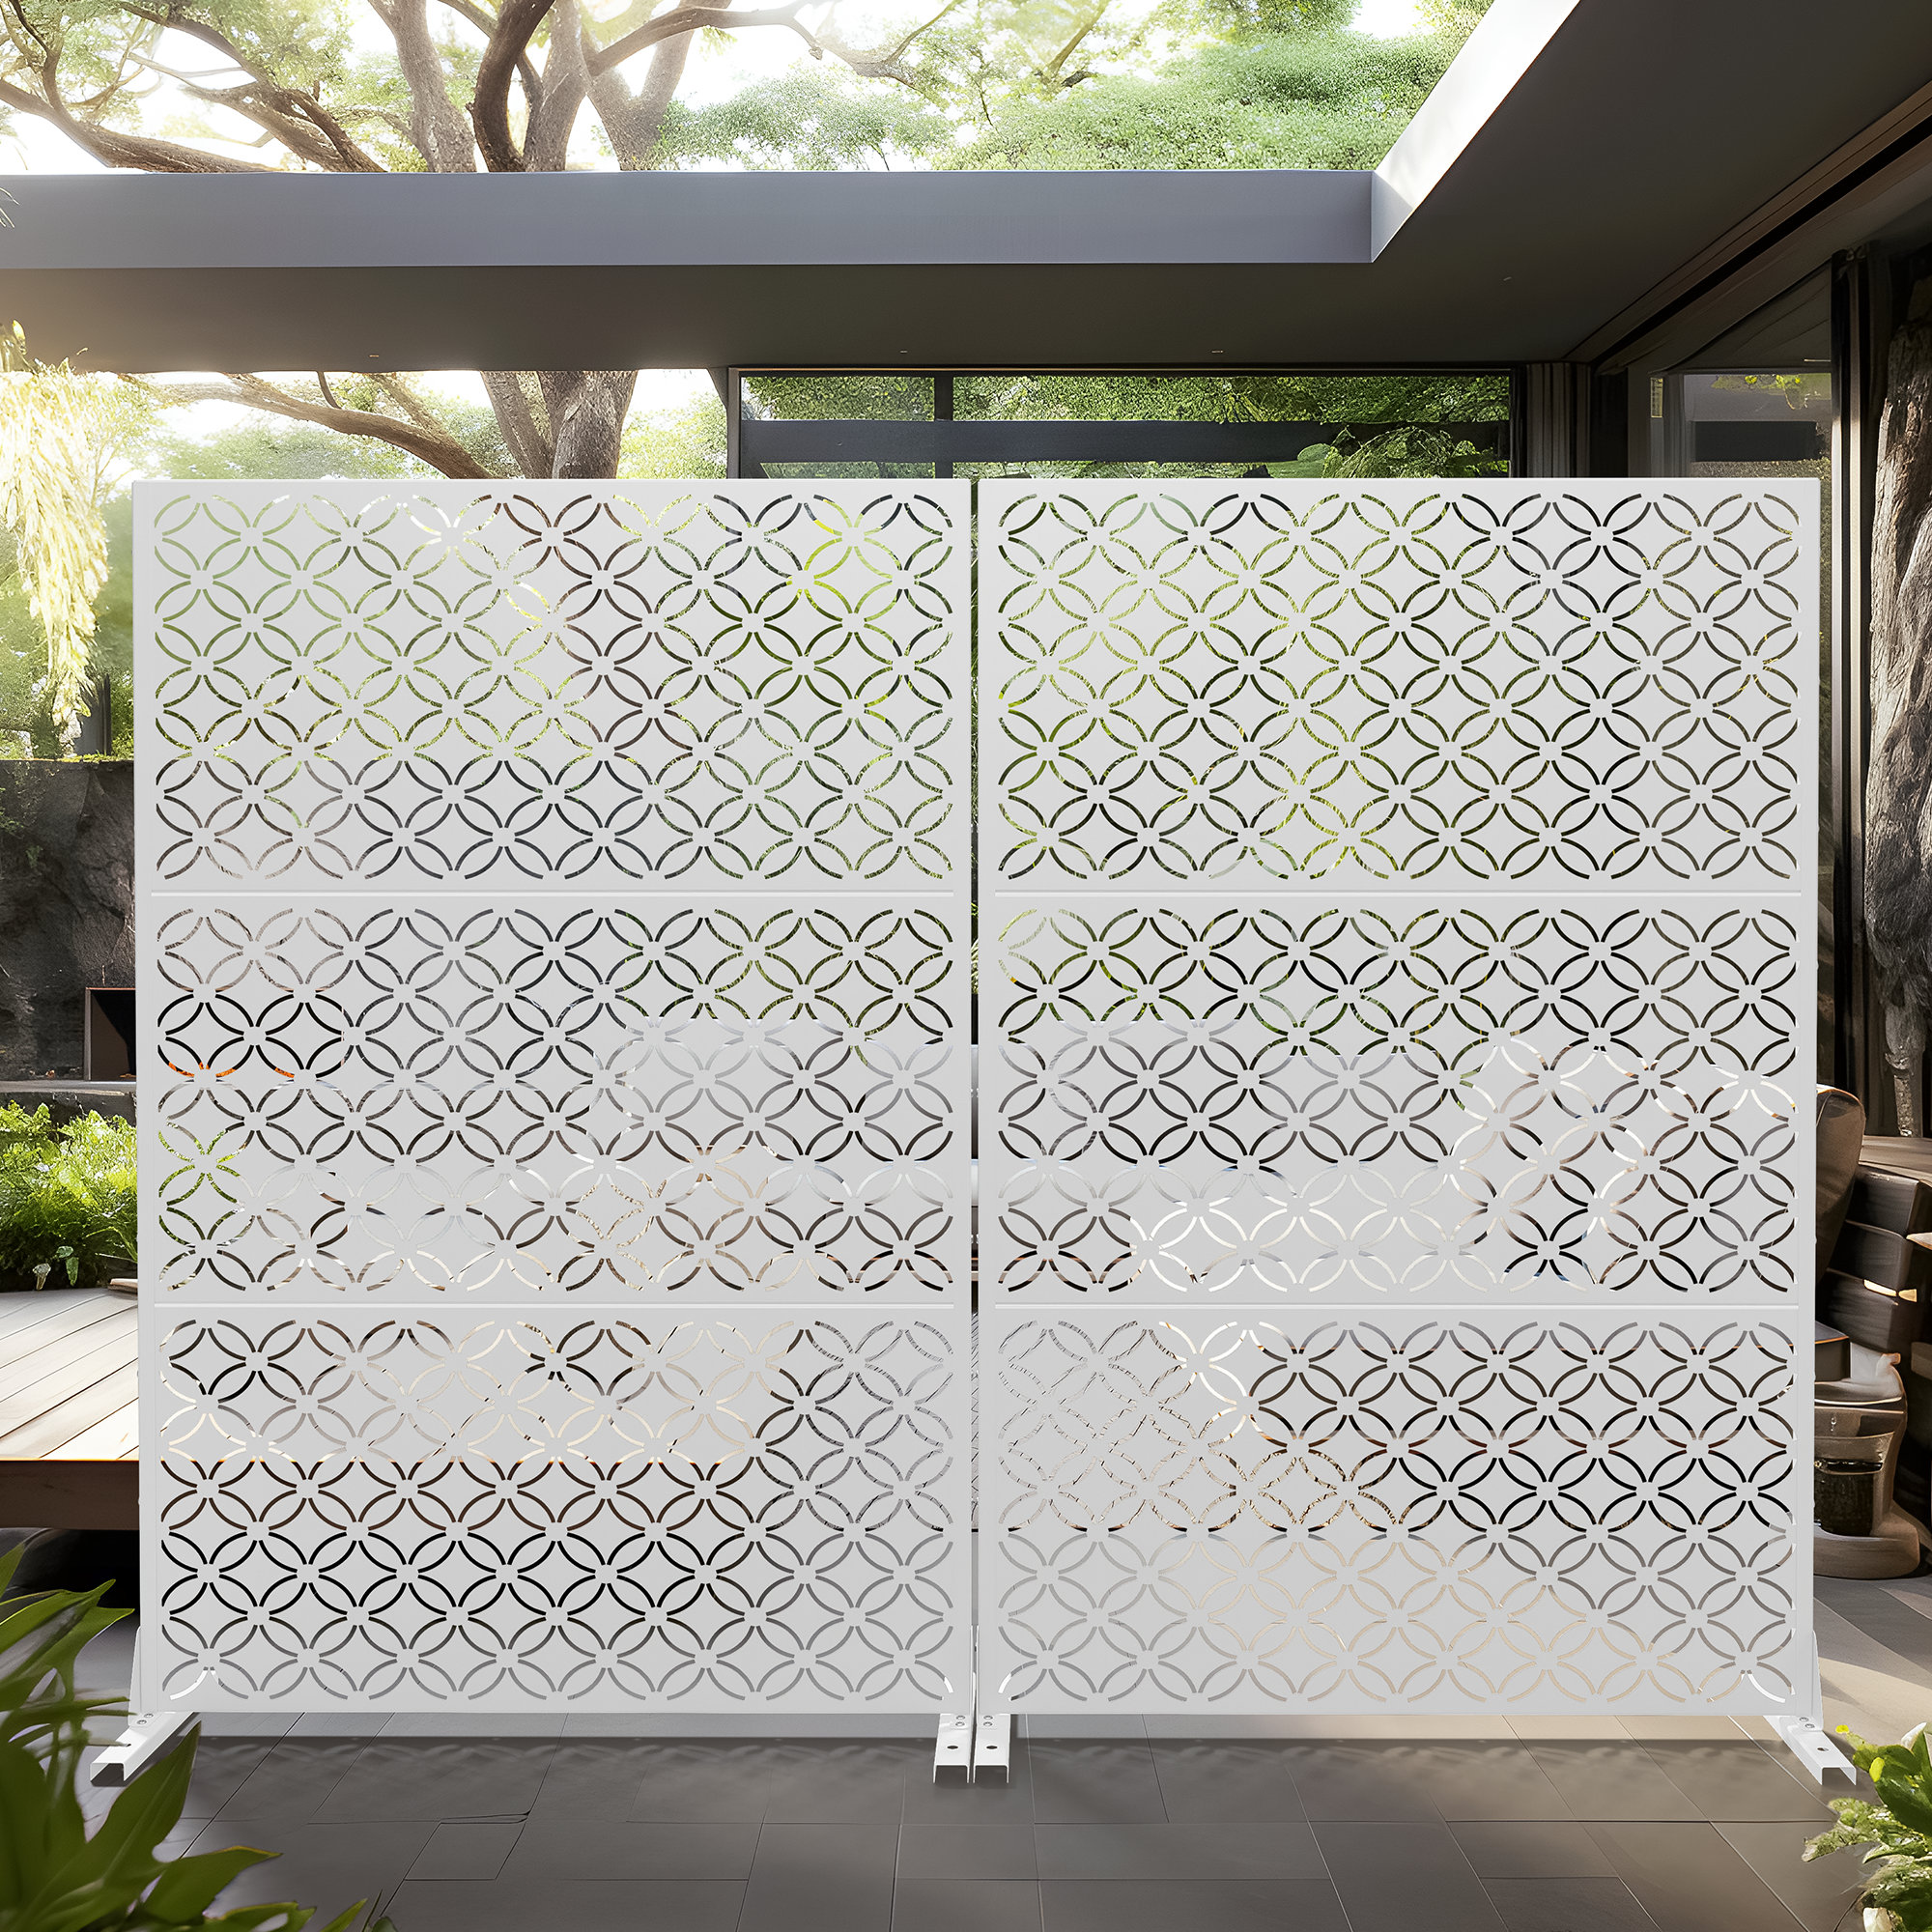 6 ft. H x 4 ft. W Metal Privacy Screen Fence Panel Fency Finish: White